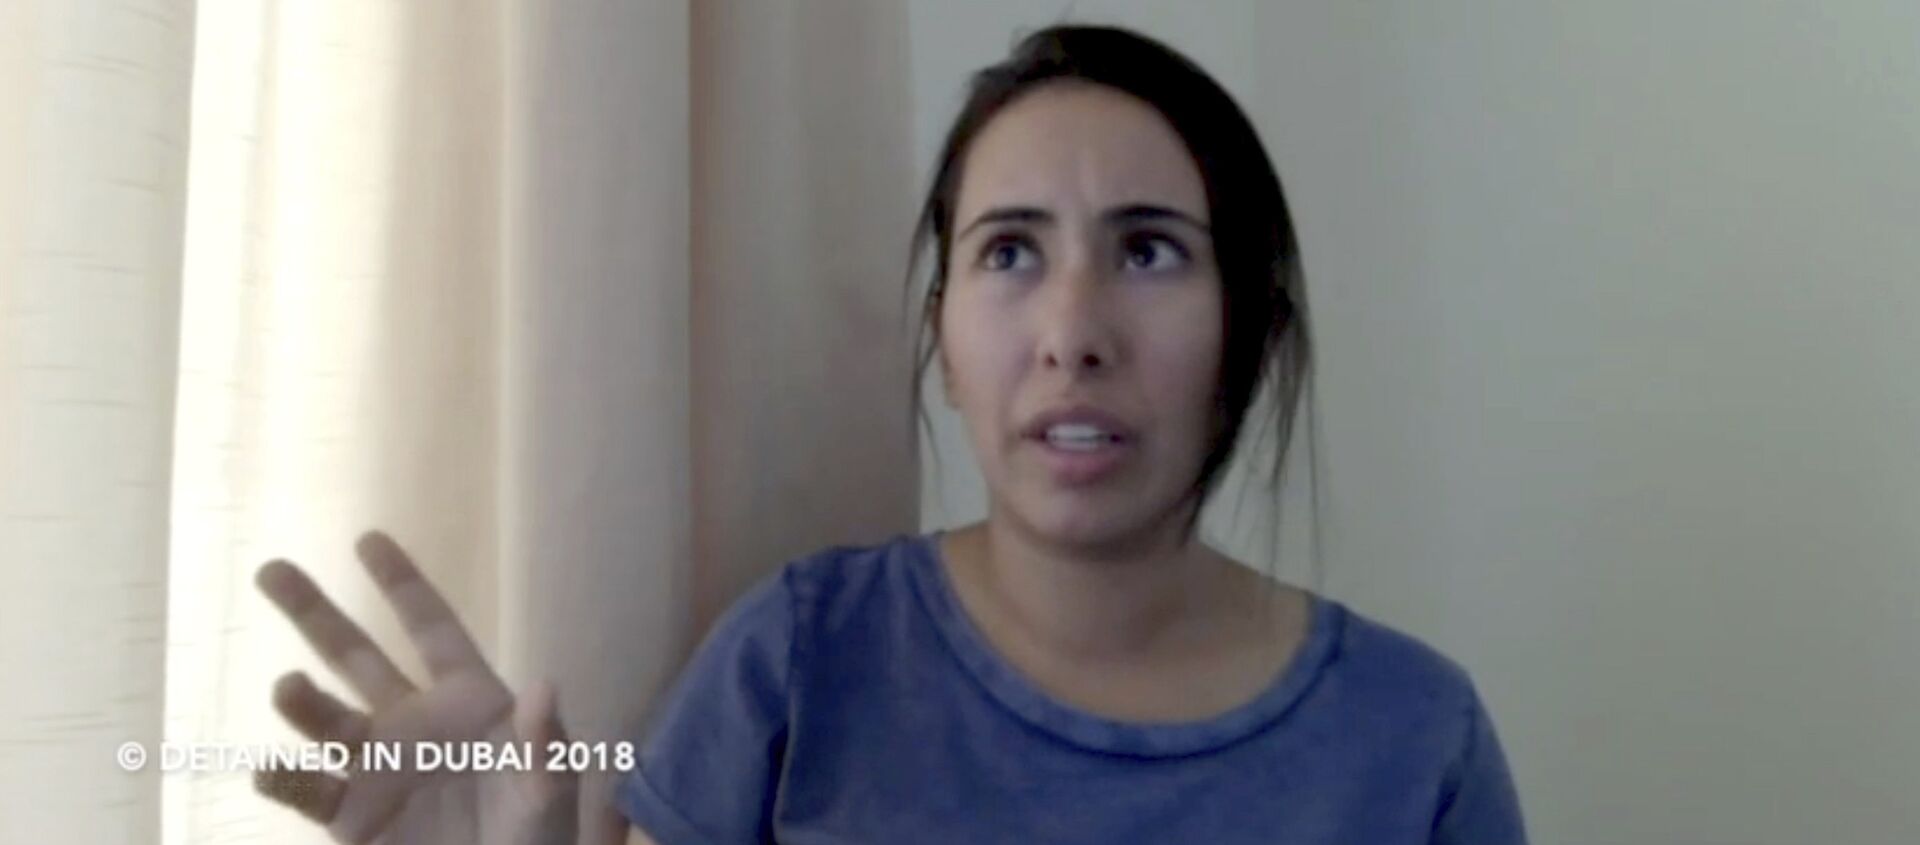 This undated image from video provided by Detained in Dubai, a London-based for-hire advocacy group long critical of the United Arab Emirates, shows Sheikha Latifa bint Mohammed Al Maktoum, a daughter of Dubai's ruler, in a 40-minute video in which she says she's planning on fleeing the country in Dubai, UAE - Sputnik International, 1920, 17.02.2021